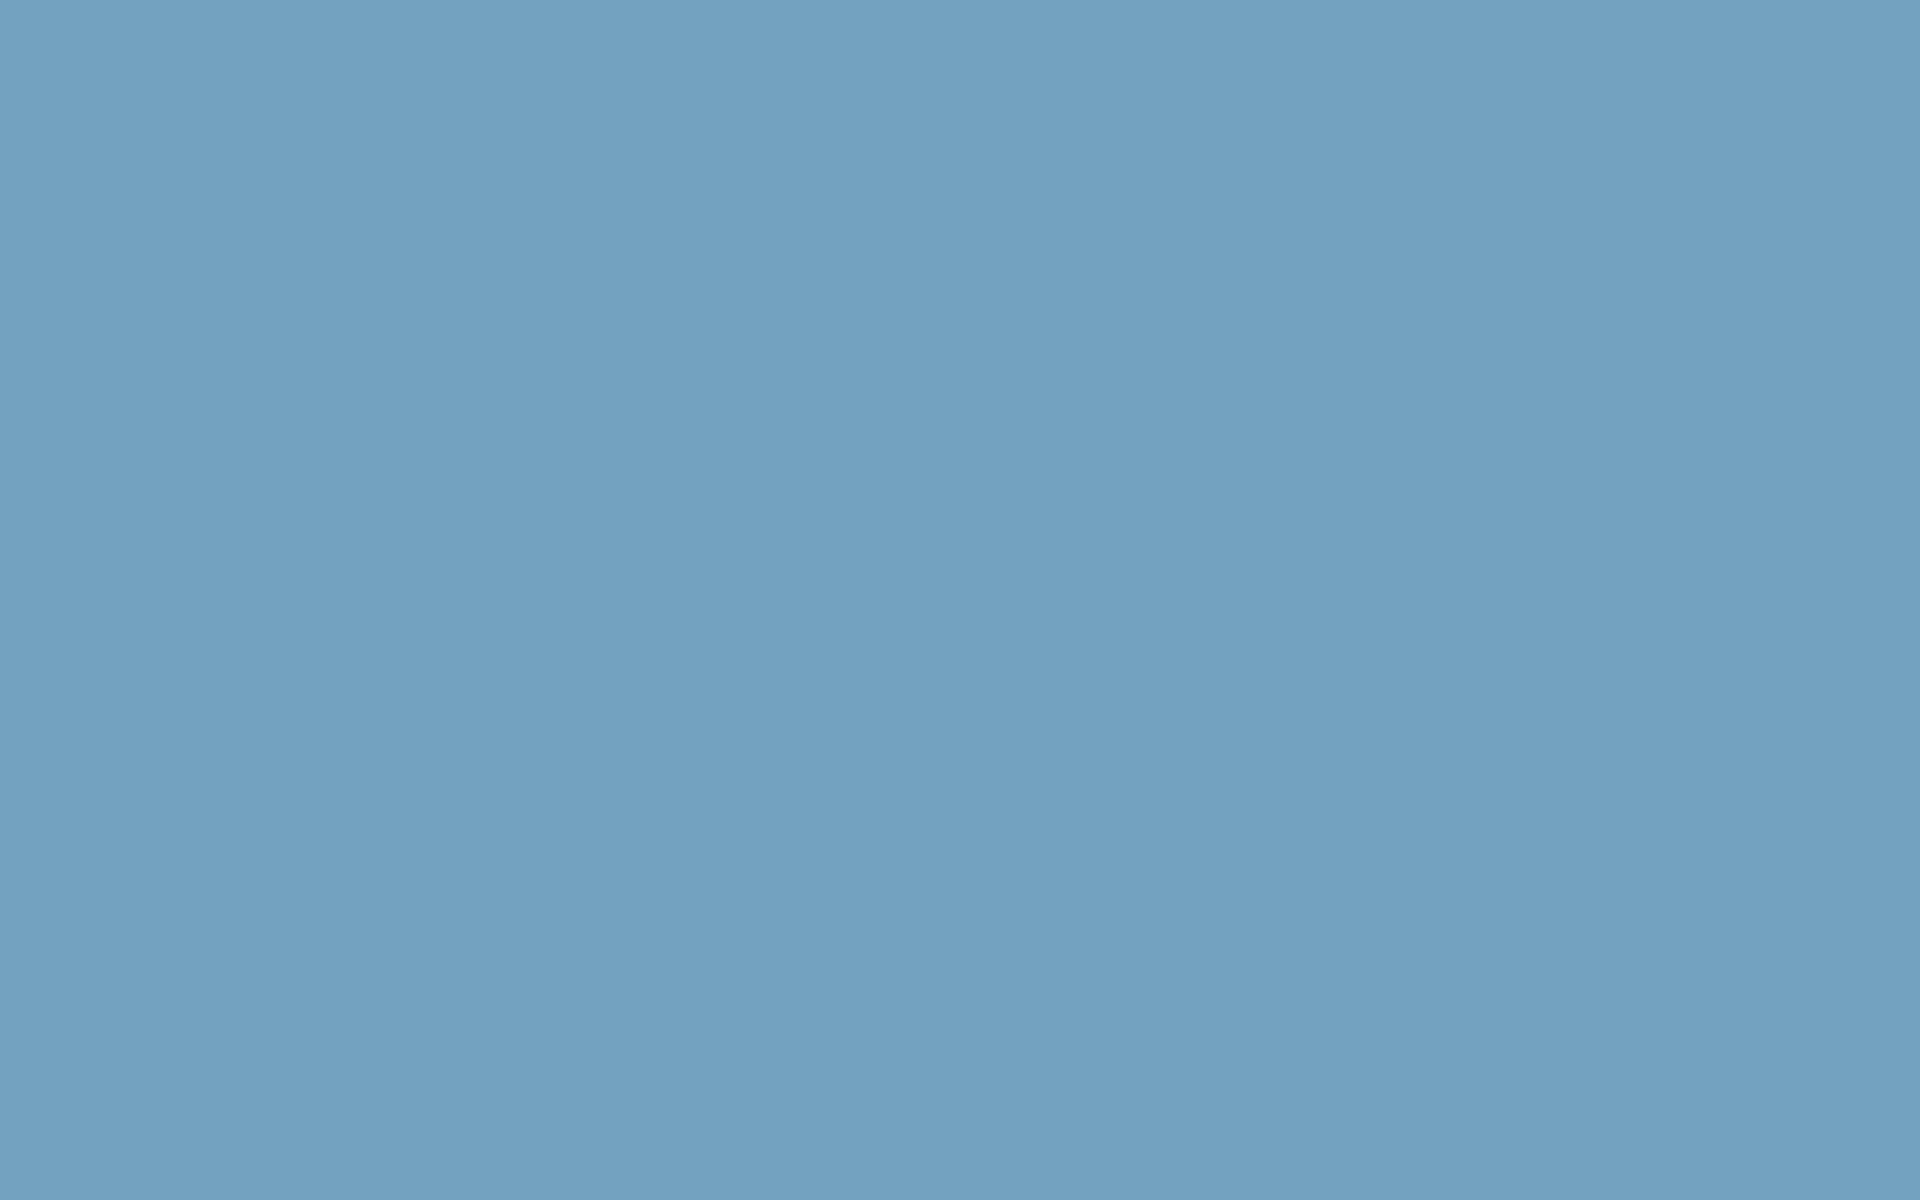 Different Shade Of Plain Blue